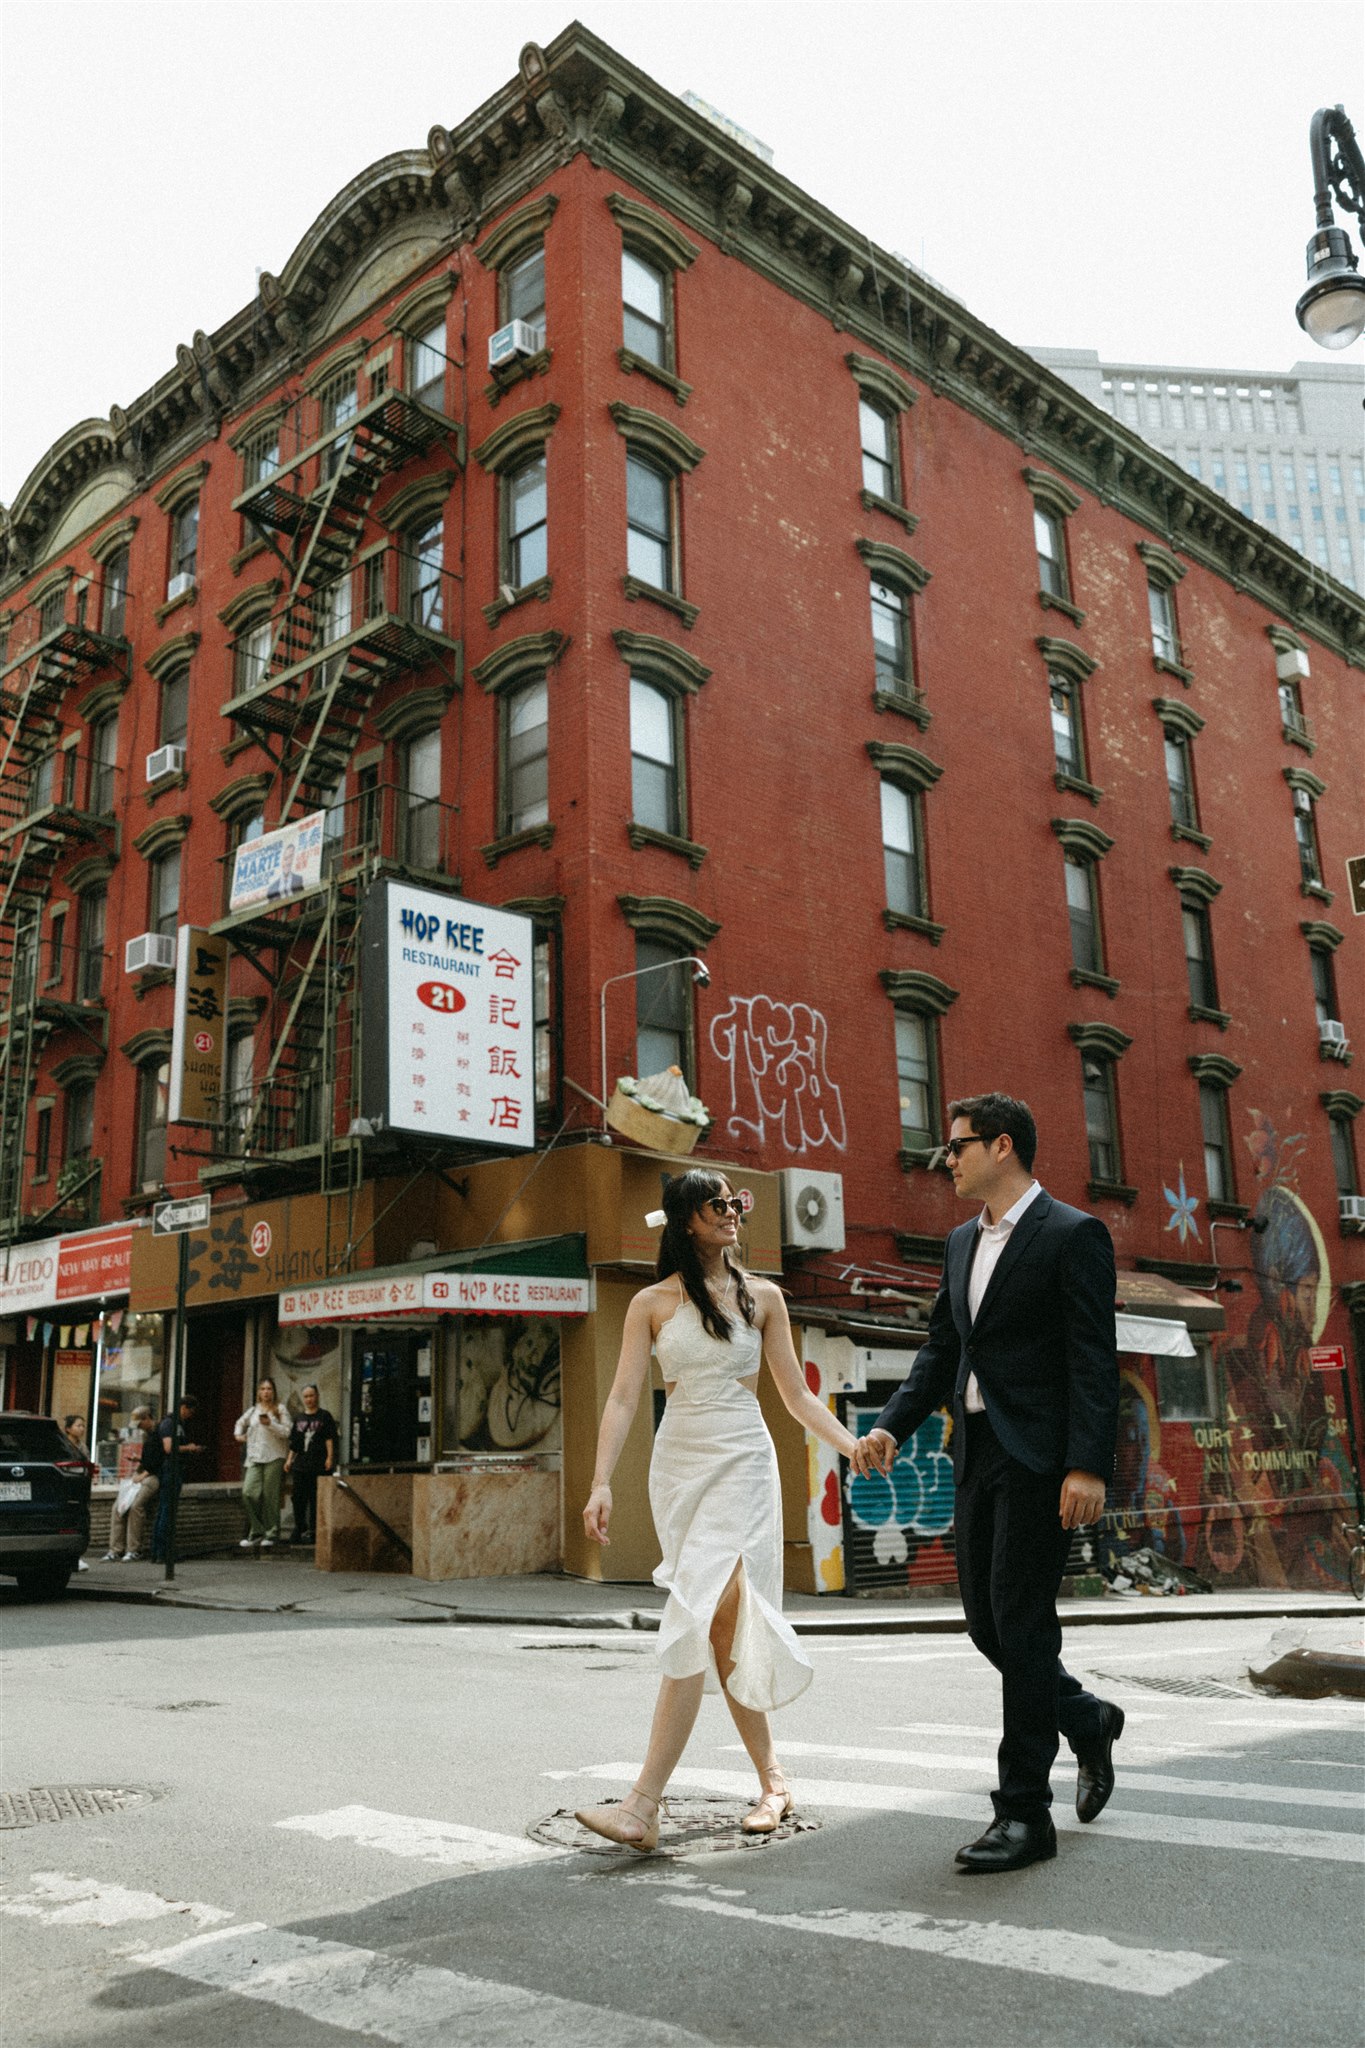 A couple dressed in formal attire affectionately facing each other on a city street corner with buildings in the background as they elope in nyc